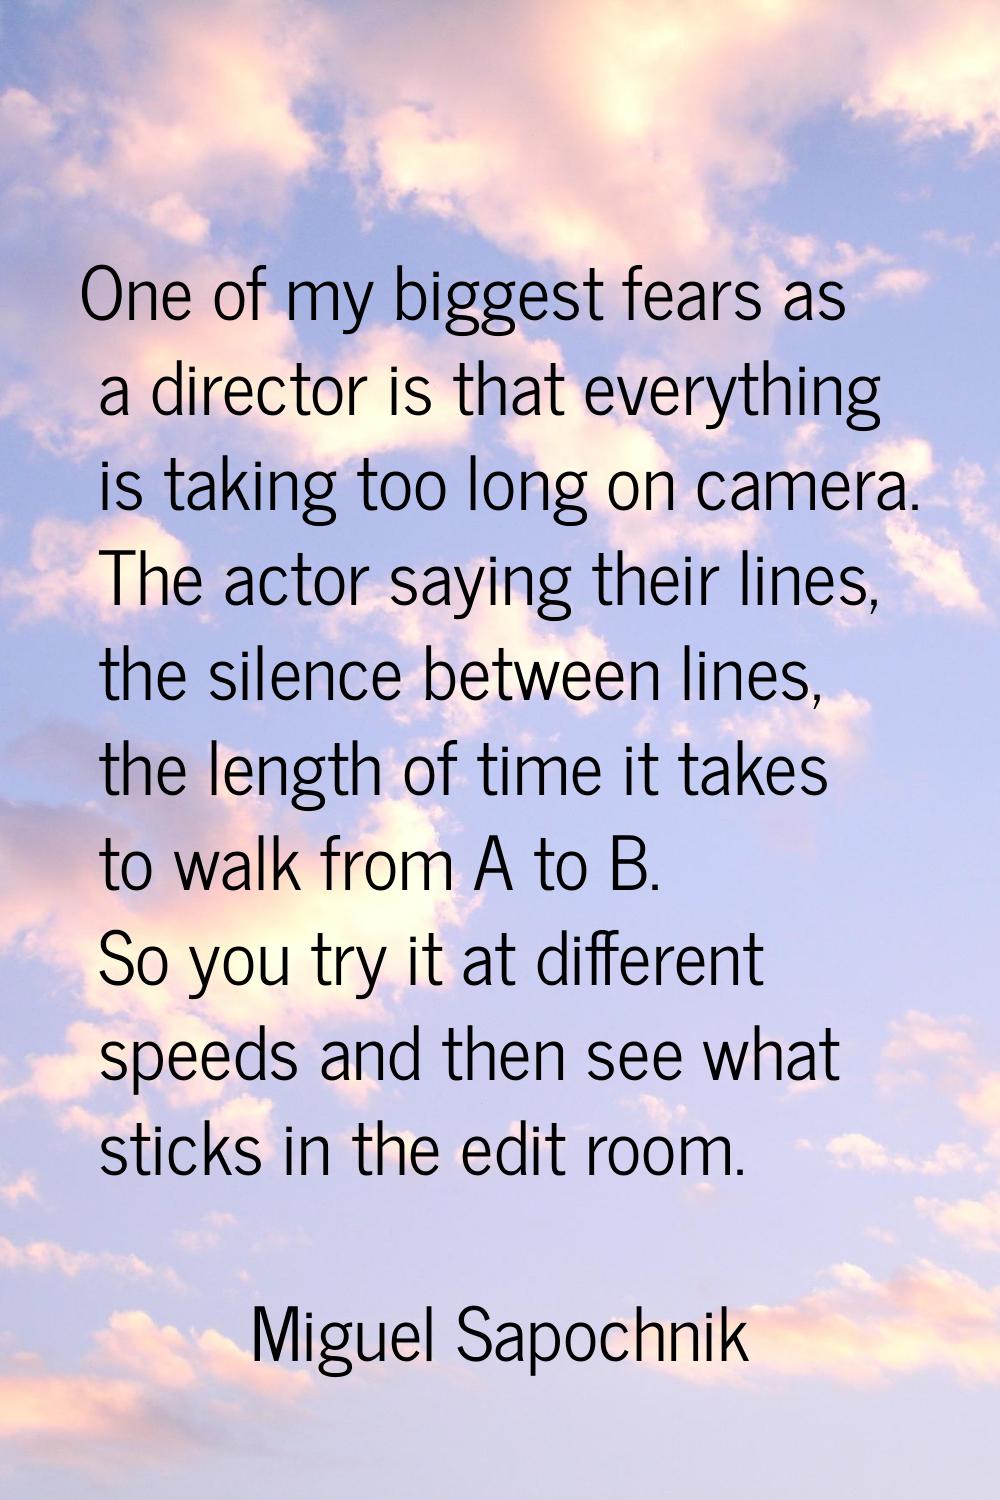 One of my biggest fears as a director is that everything is taking too long on camera. The actor sa